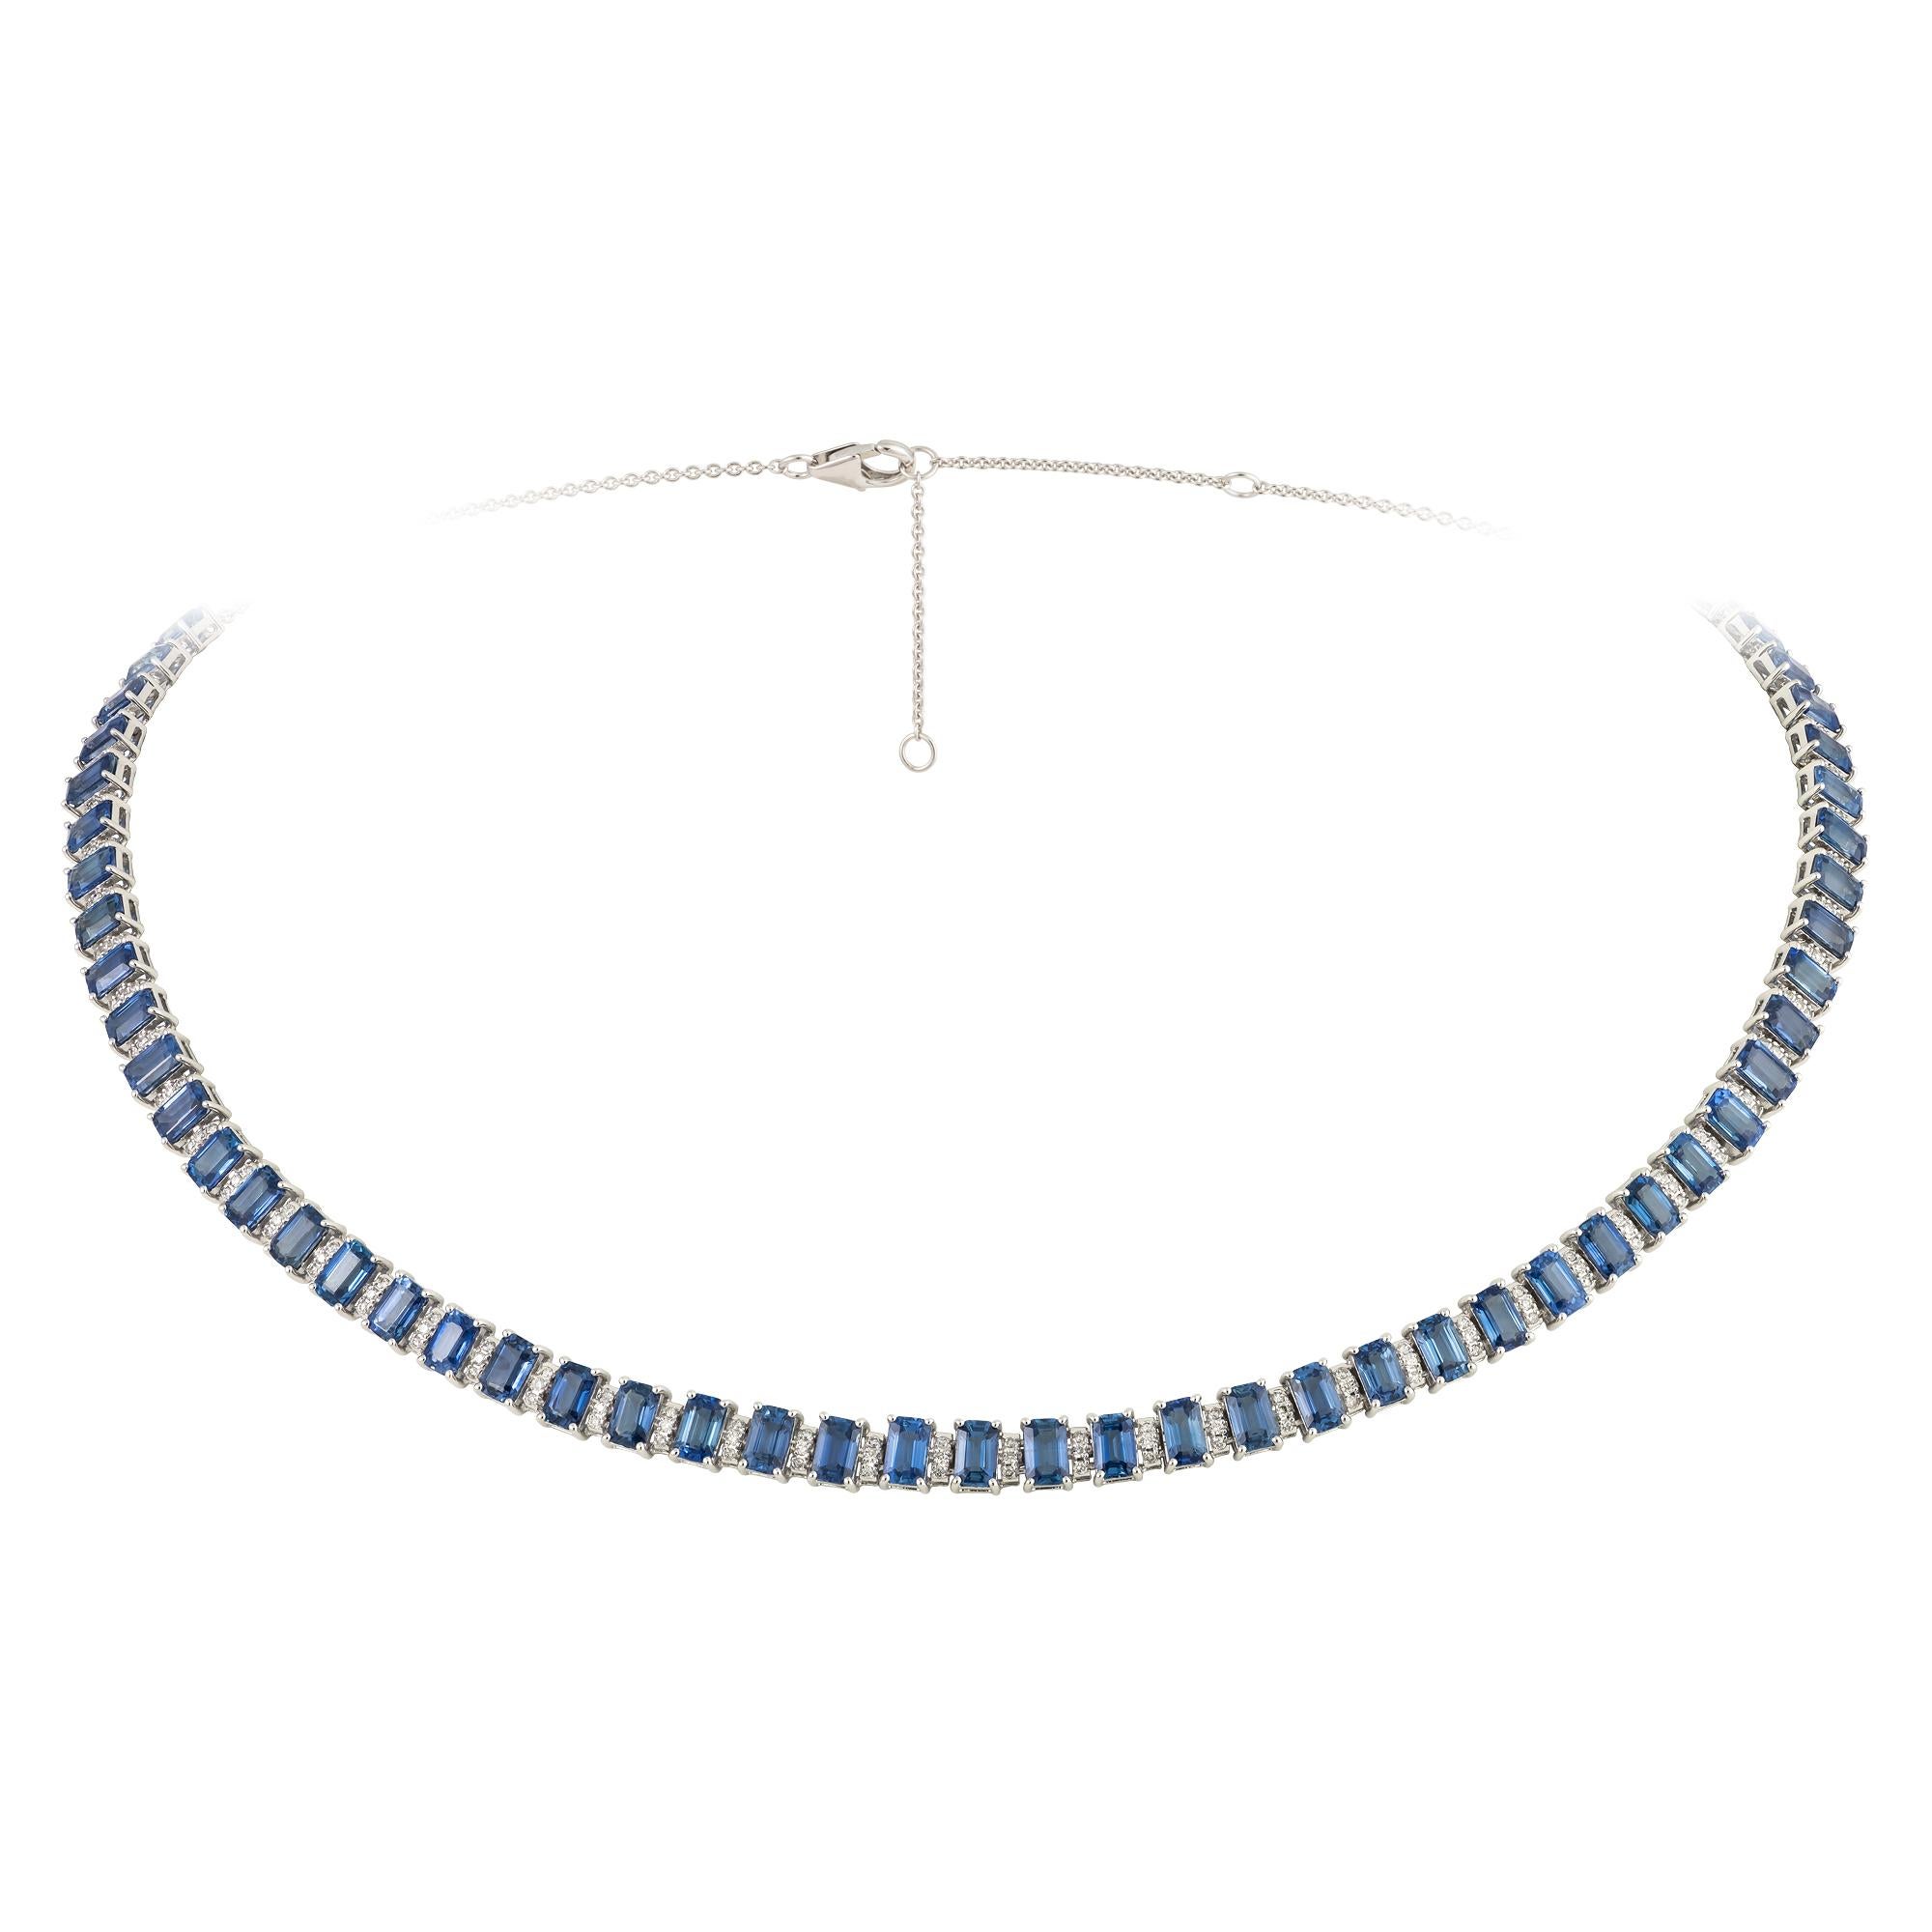 The Following Item we are offering is this Rare Important Radiant 18KT Gold Gorgeous Glittering and Sparkling Magnificent Fancy Cut Blue Sapphires and Diamond Necklace. Necklace contains approx 20CTS of Beautiful Fancy Blue Sapphires and Diamonds!!!